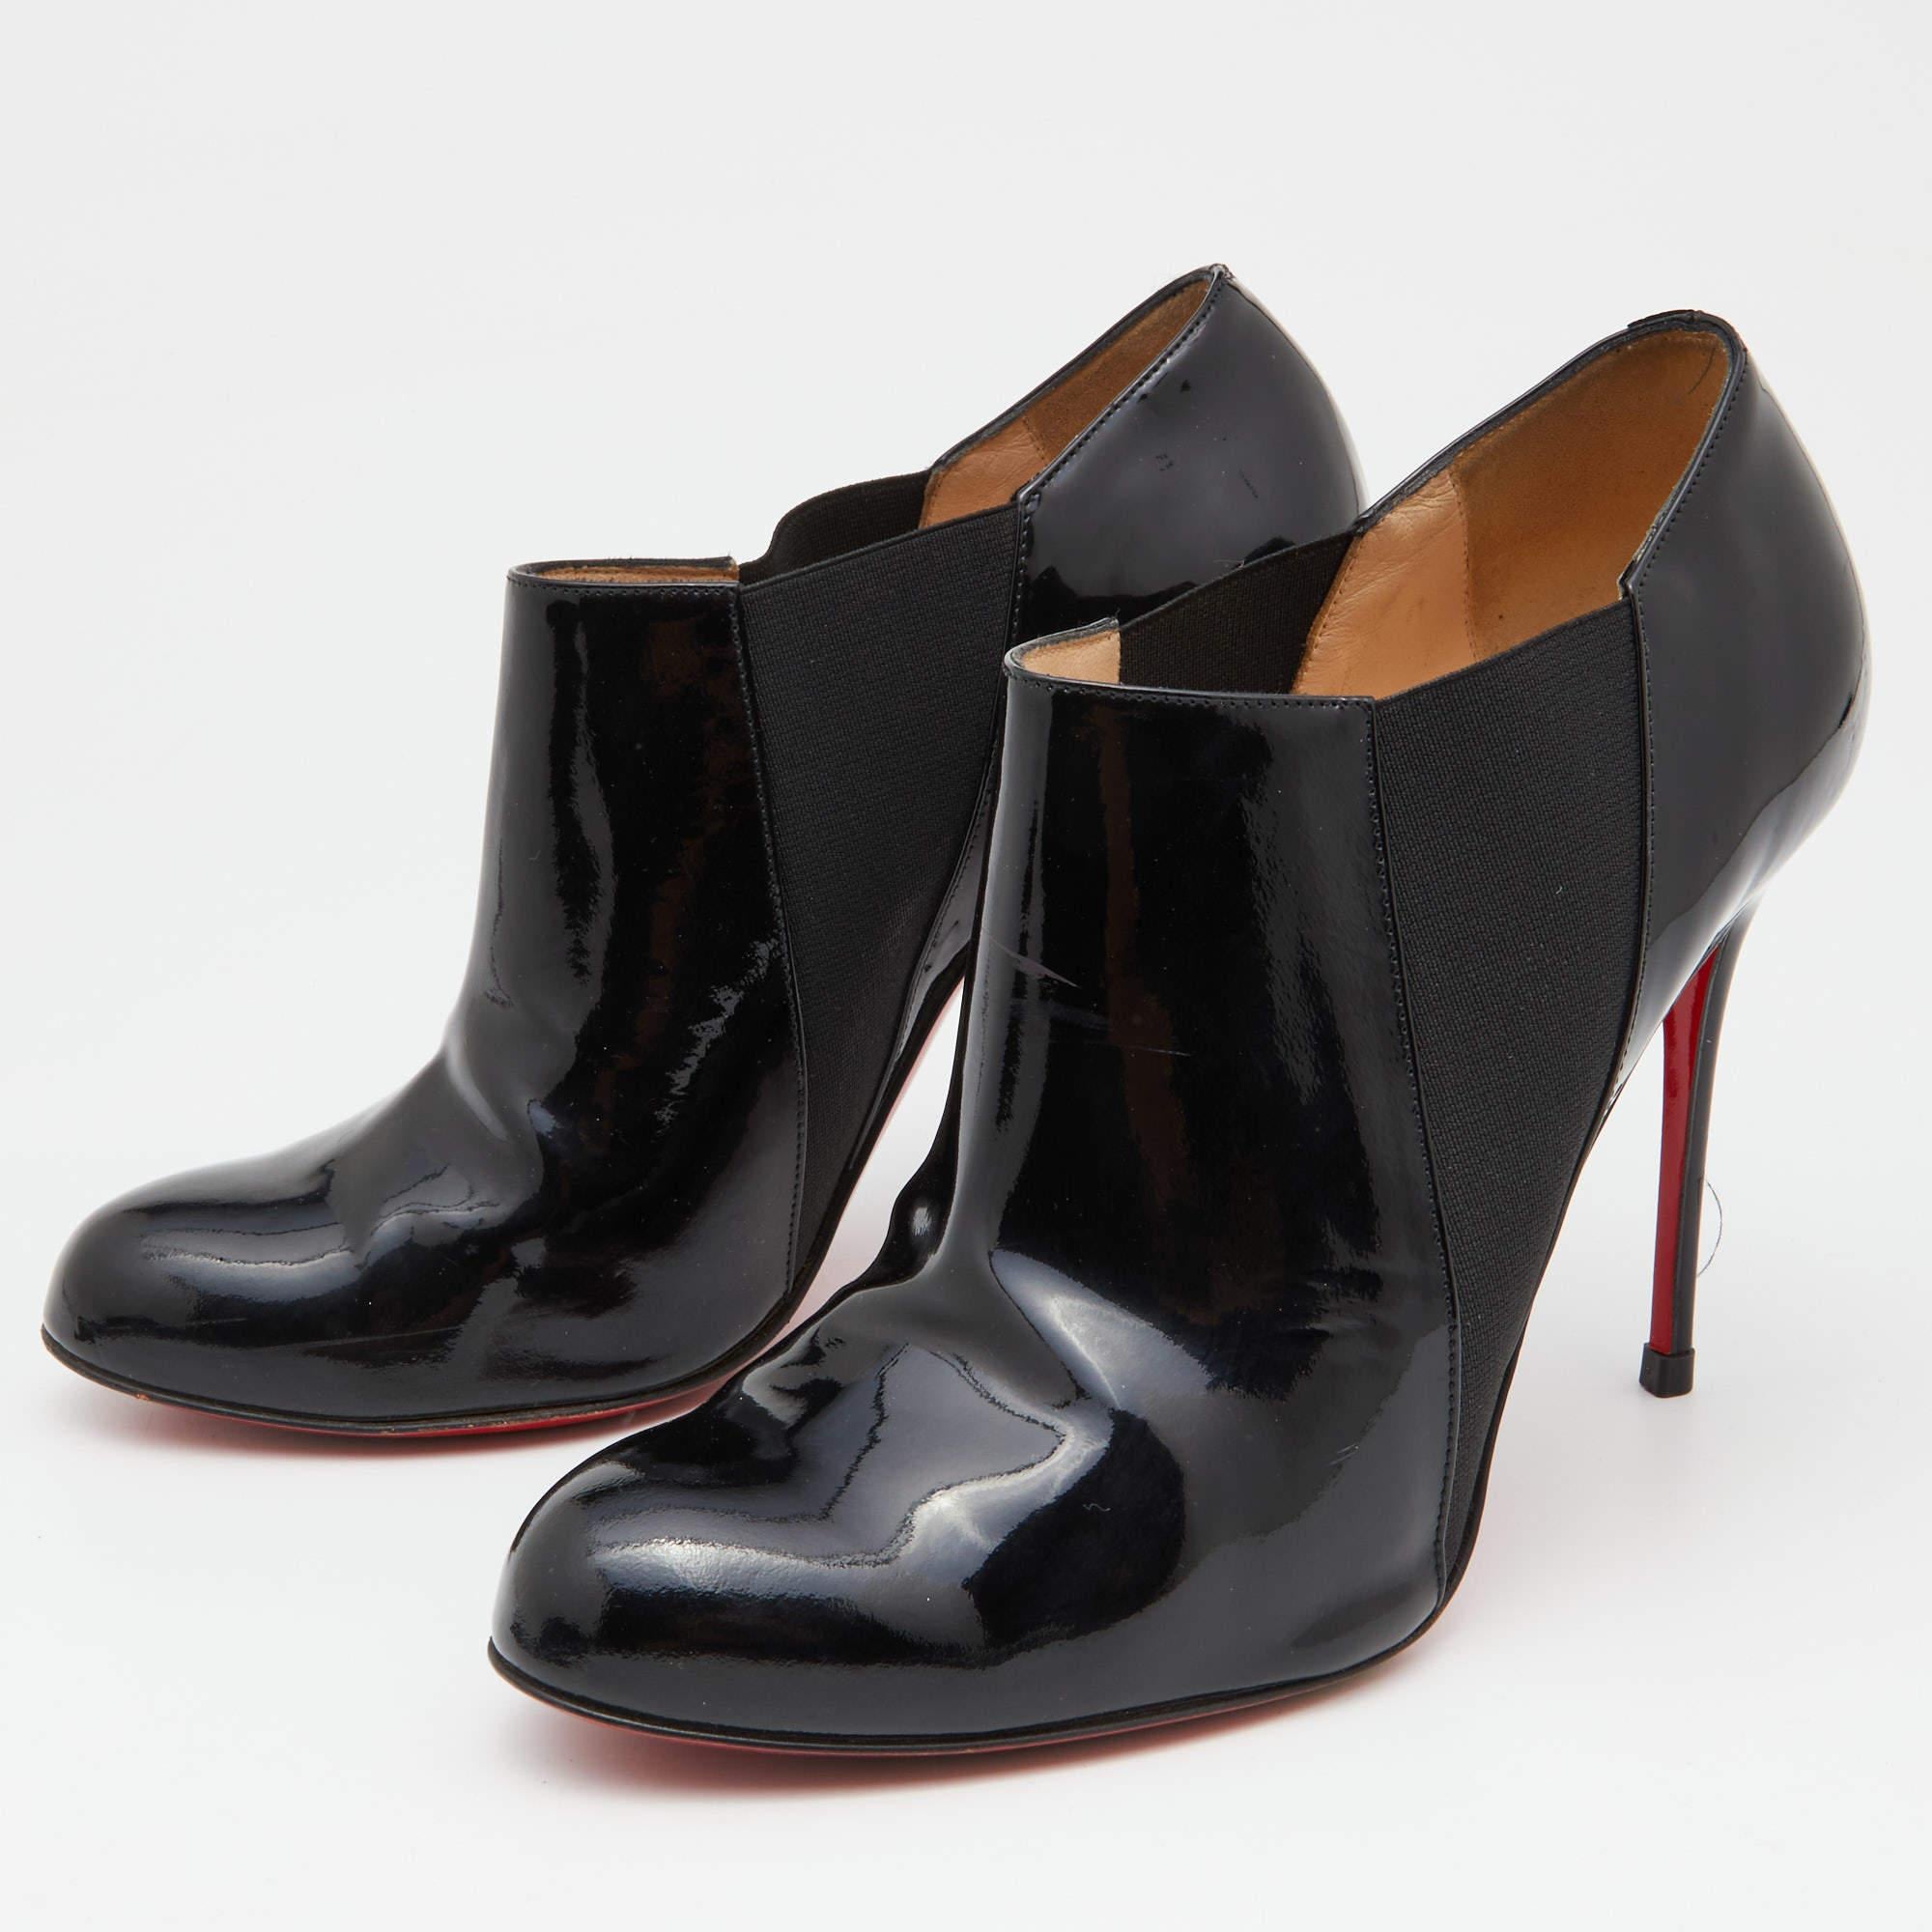 Christian Louboutin Black Patent Leather Ankle Length Boots Size 40 1